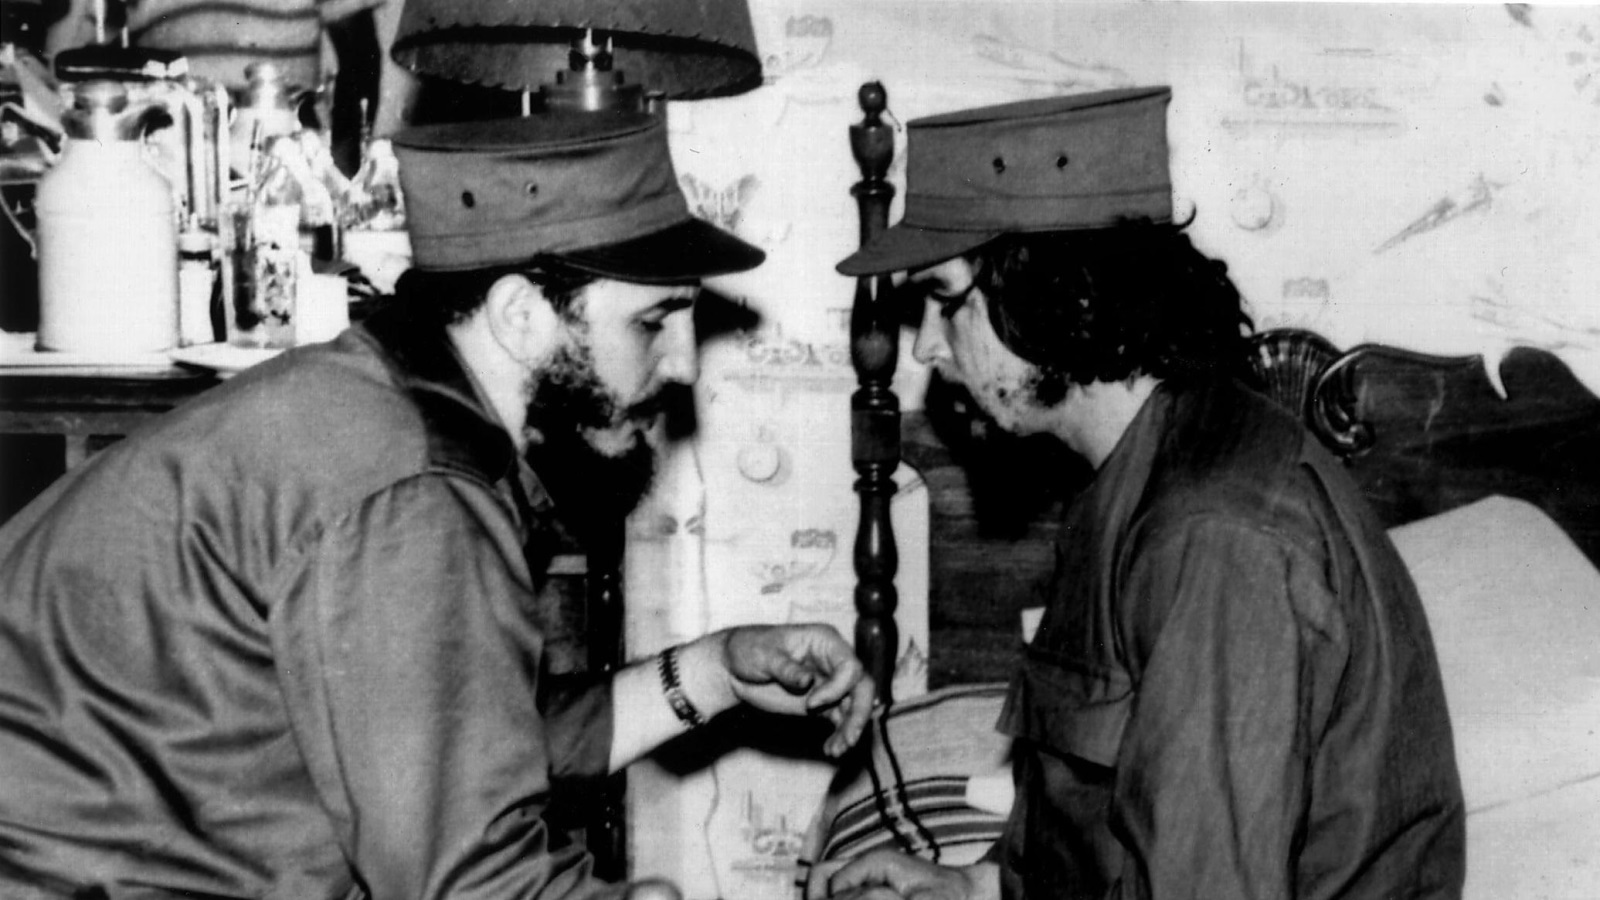 (FILE) A file picture dated January 1959 shows then Cuban Prime Minister, Fidel Castro (L), chatting with Ernesto 'Che' Guevara (R) inside a bunkhouse not long after the victory of the revolution that caused the downfall of Fulgencio Batista in Cuba. Current Cuban president, Raul Castro, announced on 25 November 2016 his brother's death on the Cuban state TV. Cuban former President Fidel Castro has died at the age of 90.